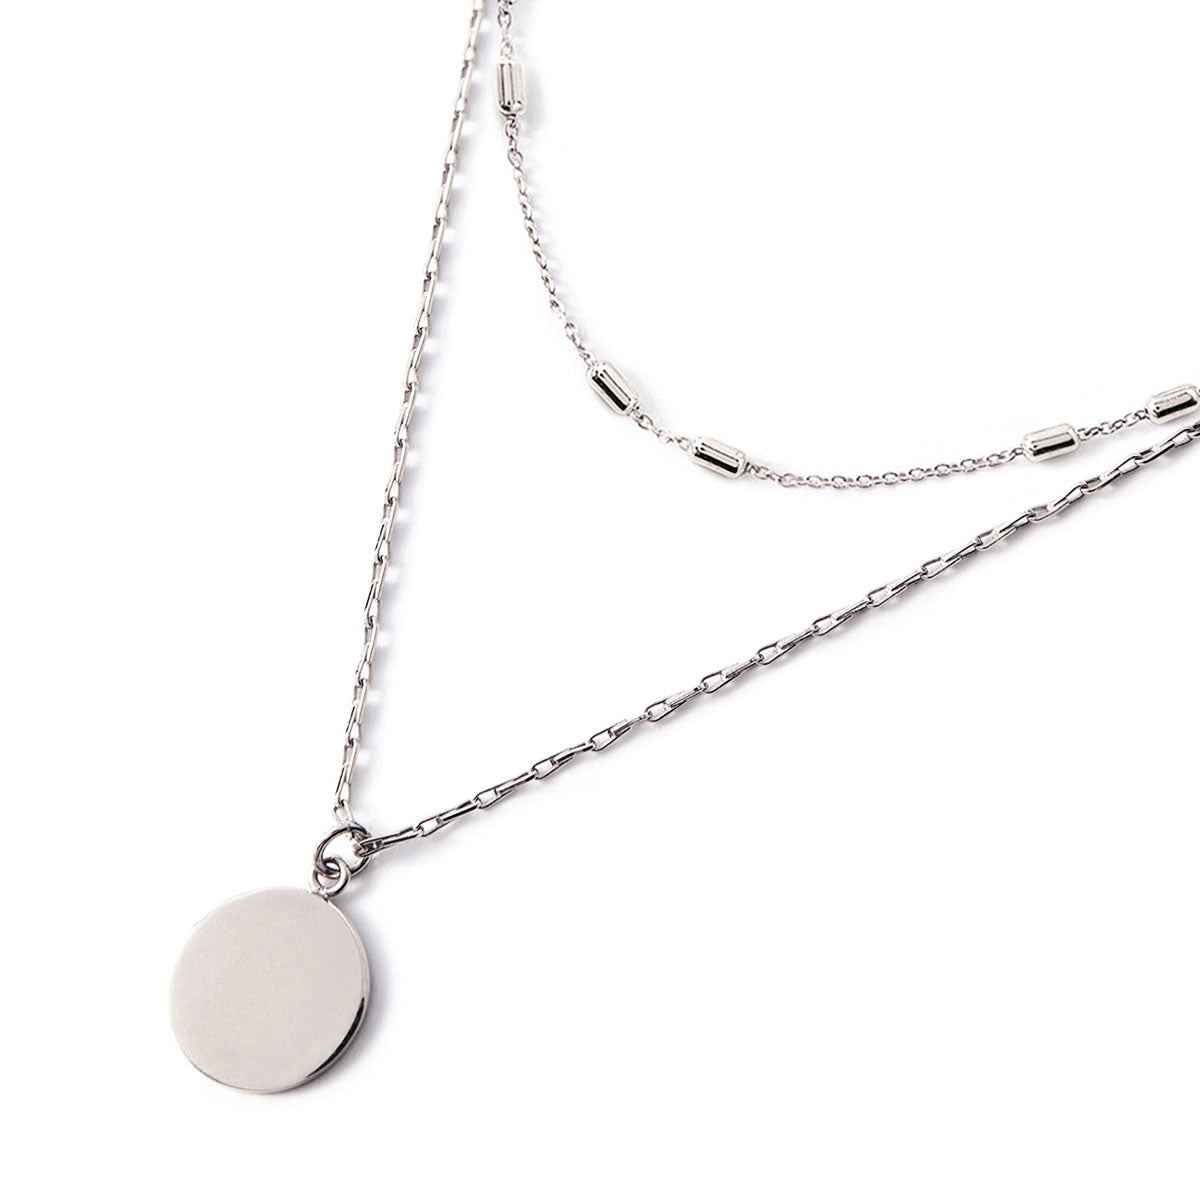 Delicate Chain Crystal Necklace Layered Sterling in Set AMYO – Silver Disc Jewelry